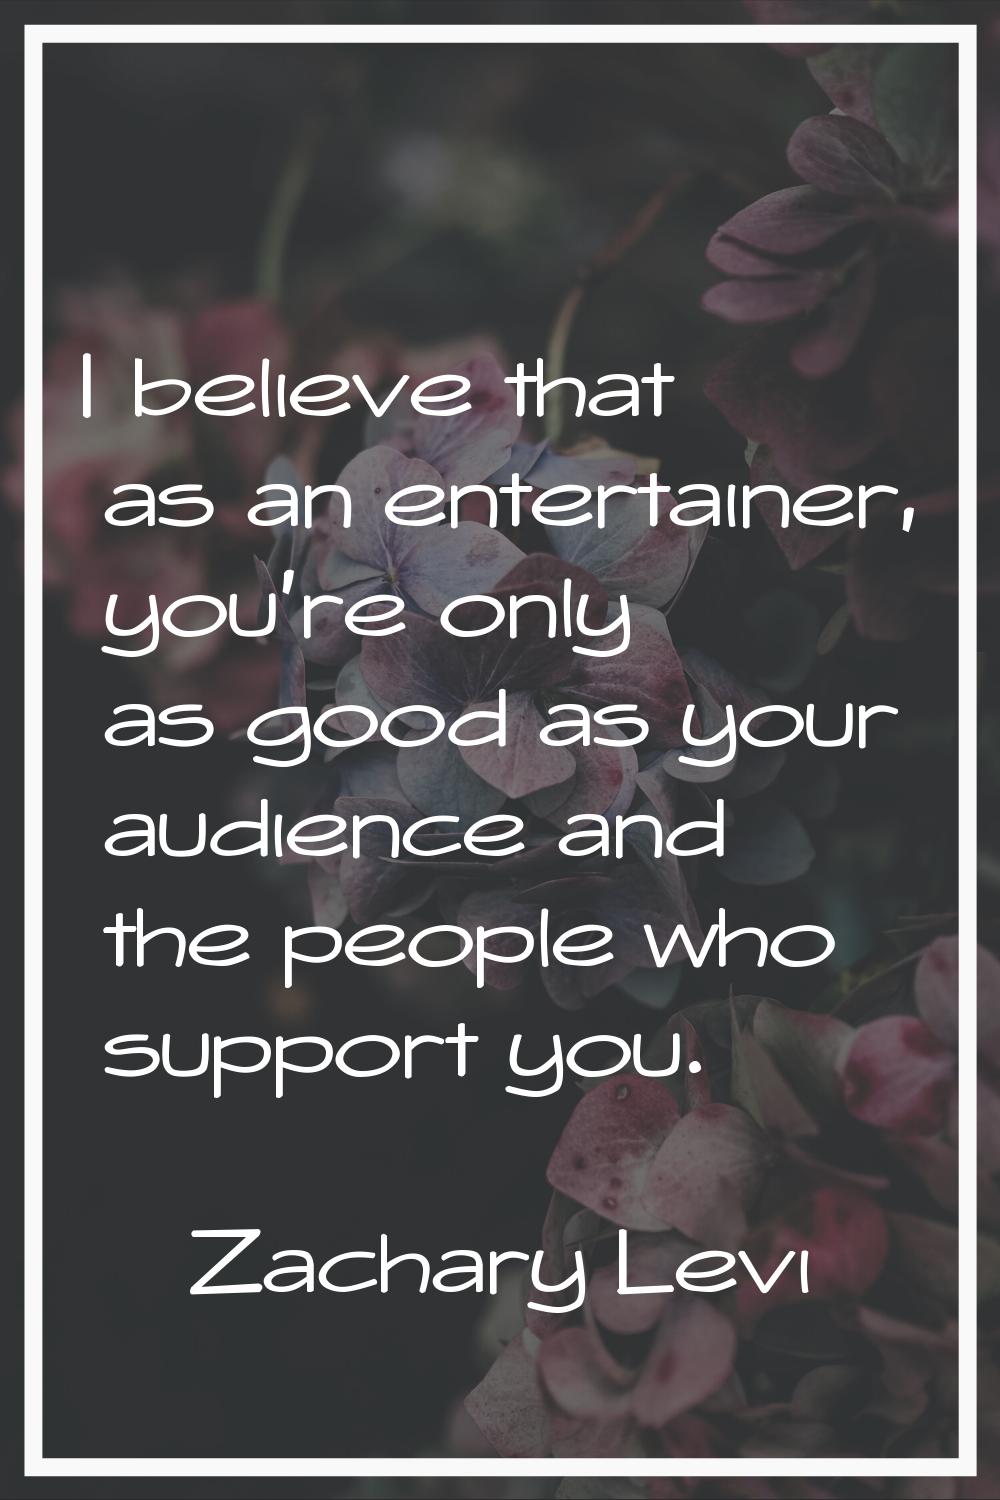 I believe that as an entertainer, you're only as good as your audience and the people who support y